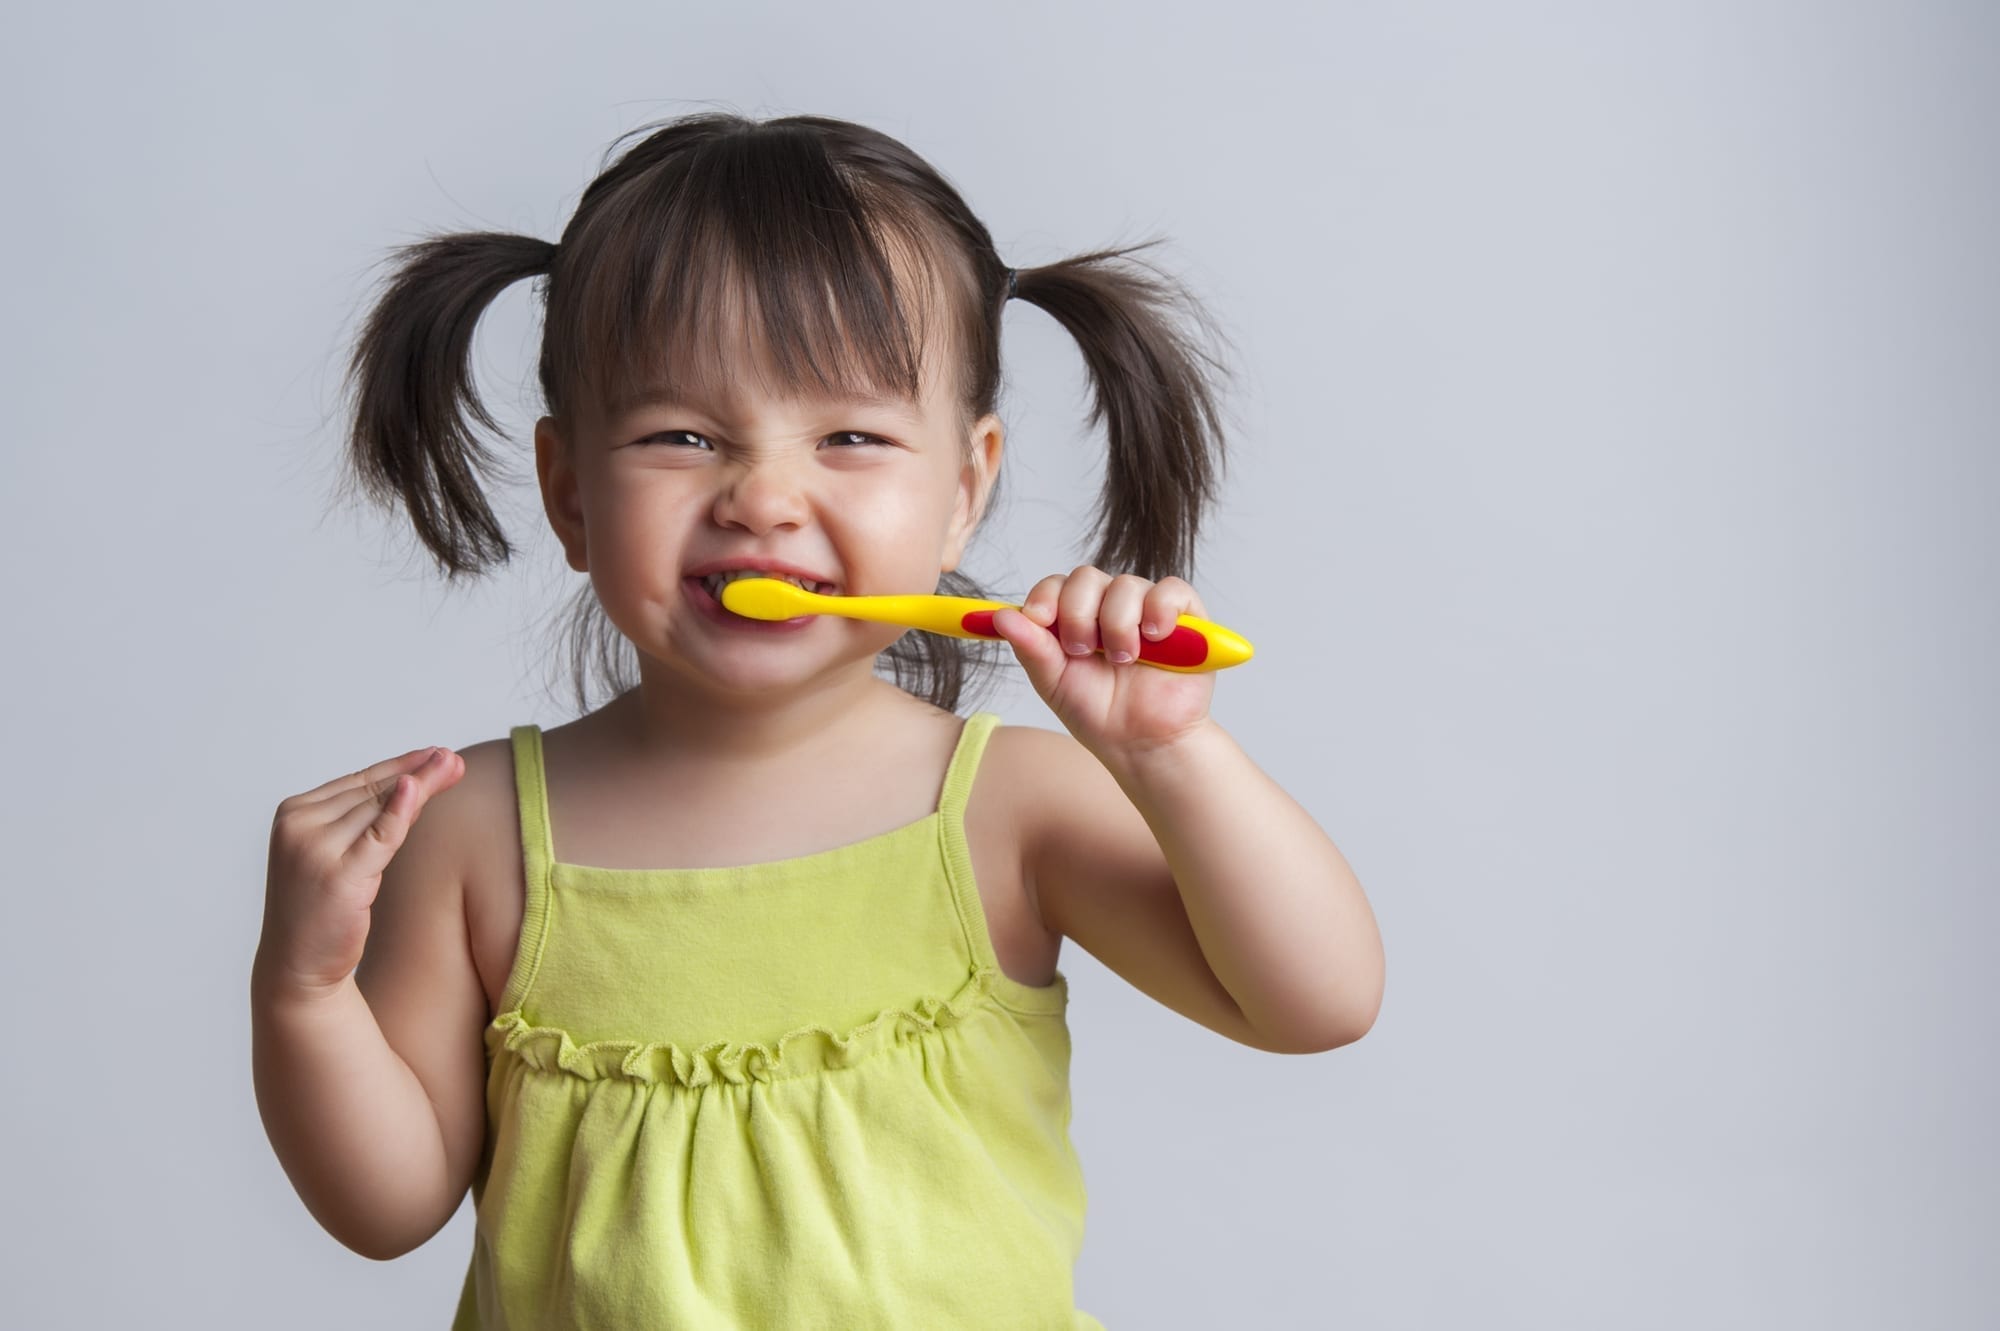 Top 10 Q&A About Dentistry for Kids